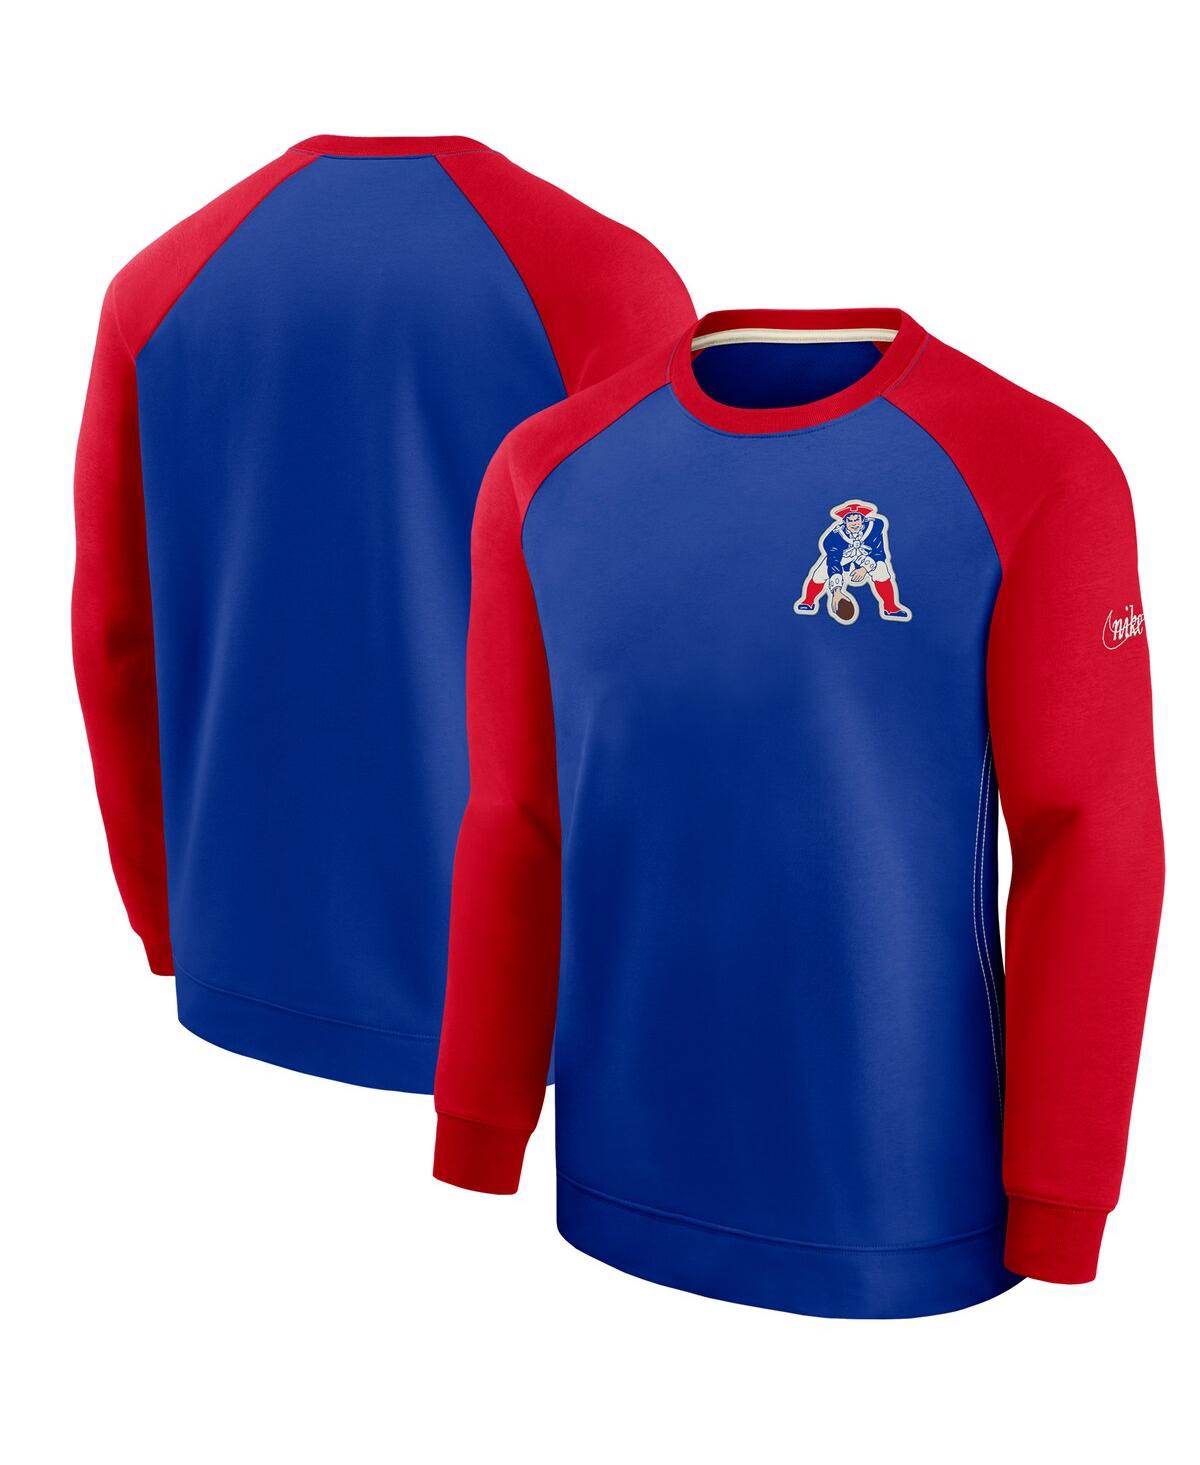 Nike Men's  Royal And Red New England Patriots Historic Raglan Crew Performance Sweater In Royal,red